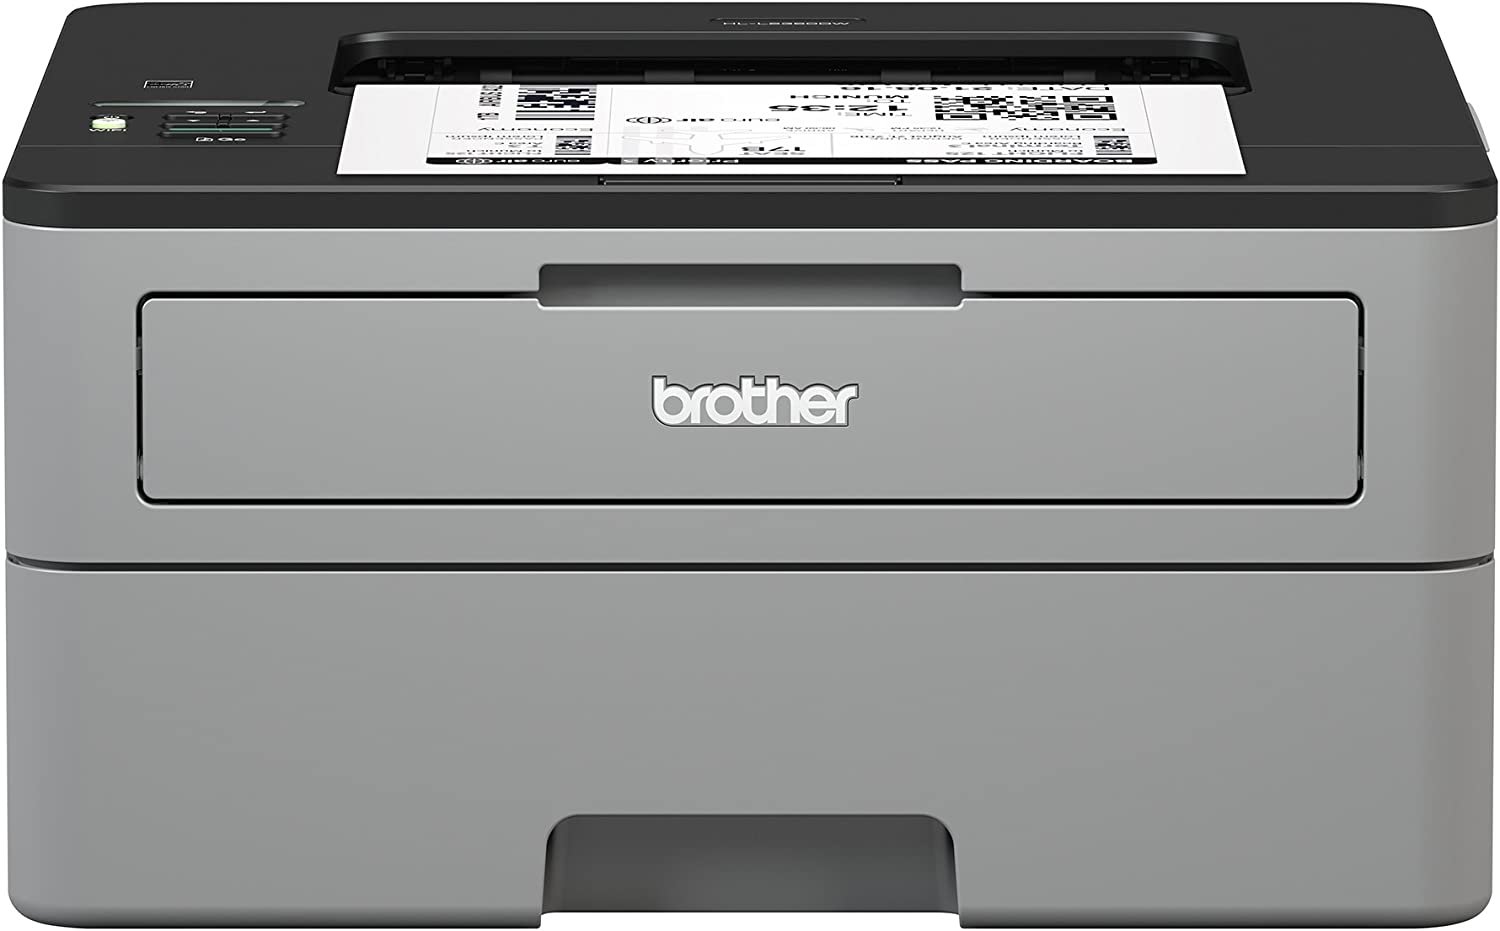 Brother HL-L2350DW drivers, software & user's guide download